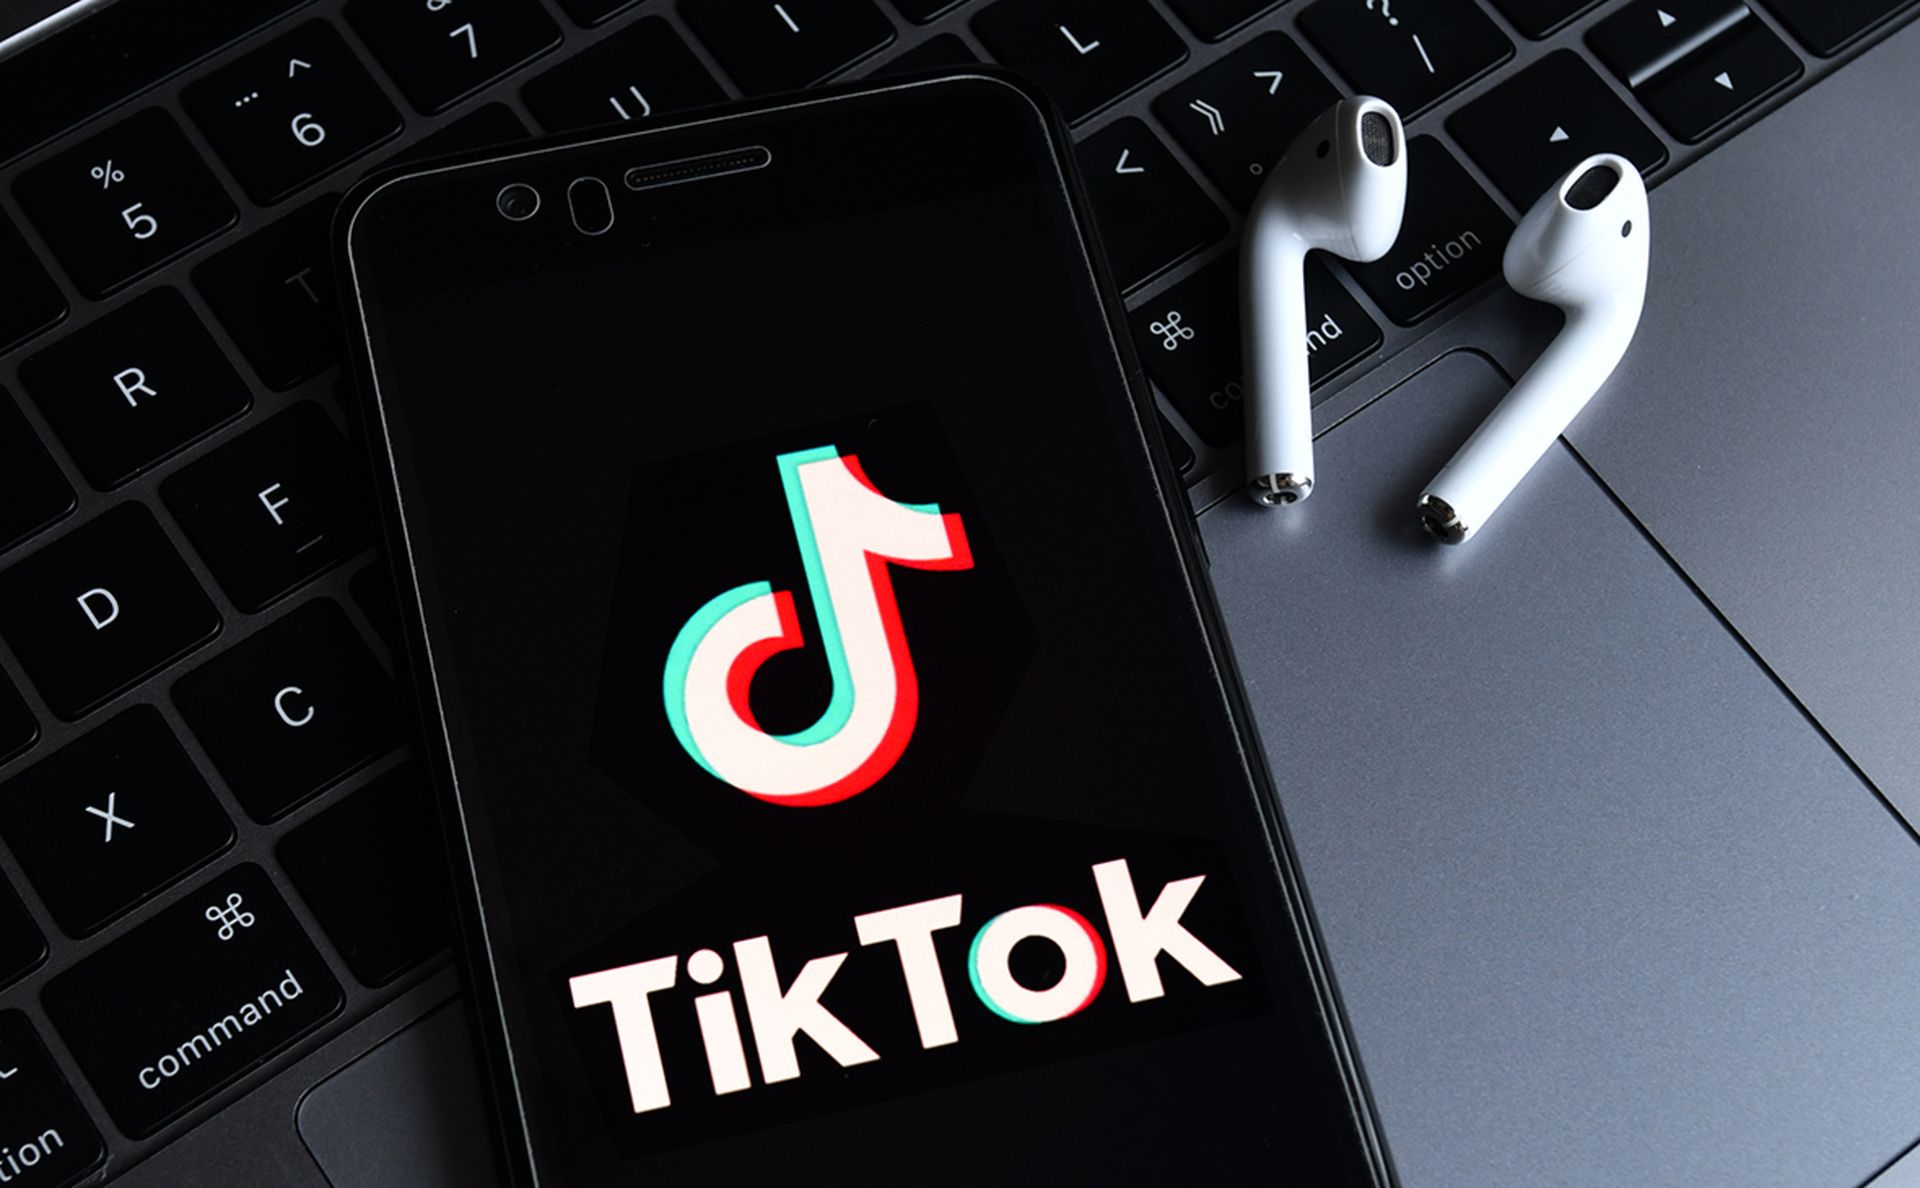 In this article, we are going to be going over why is my TikTok account locked and how to fix it, so you can get back on the popular social media platform.